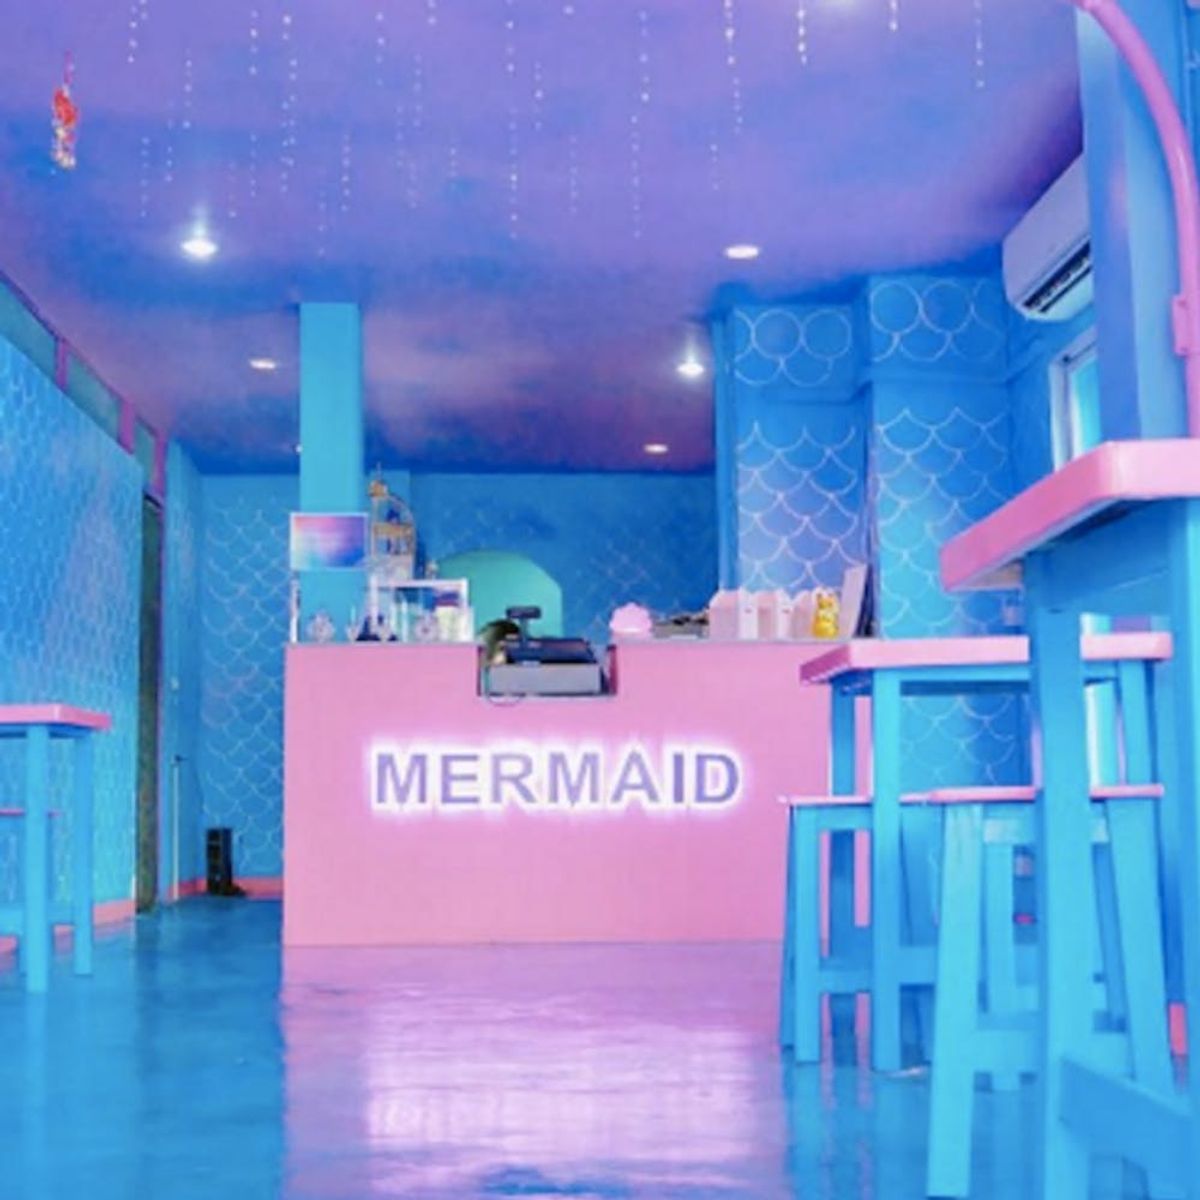 This Full-Fledged Mermaid Cafe Is the Stuff of DREAMS